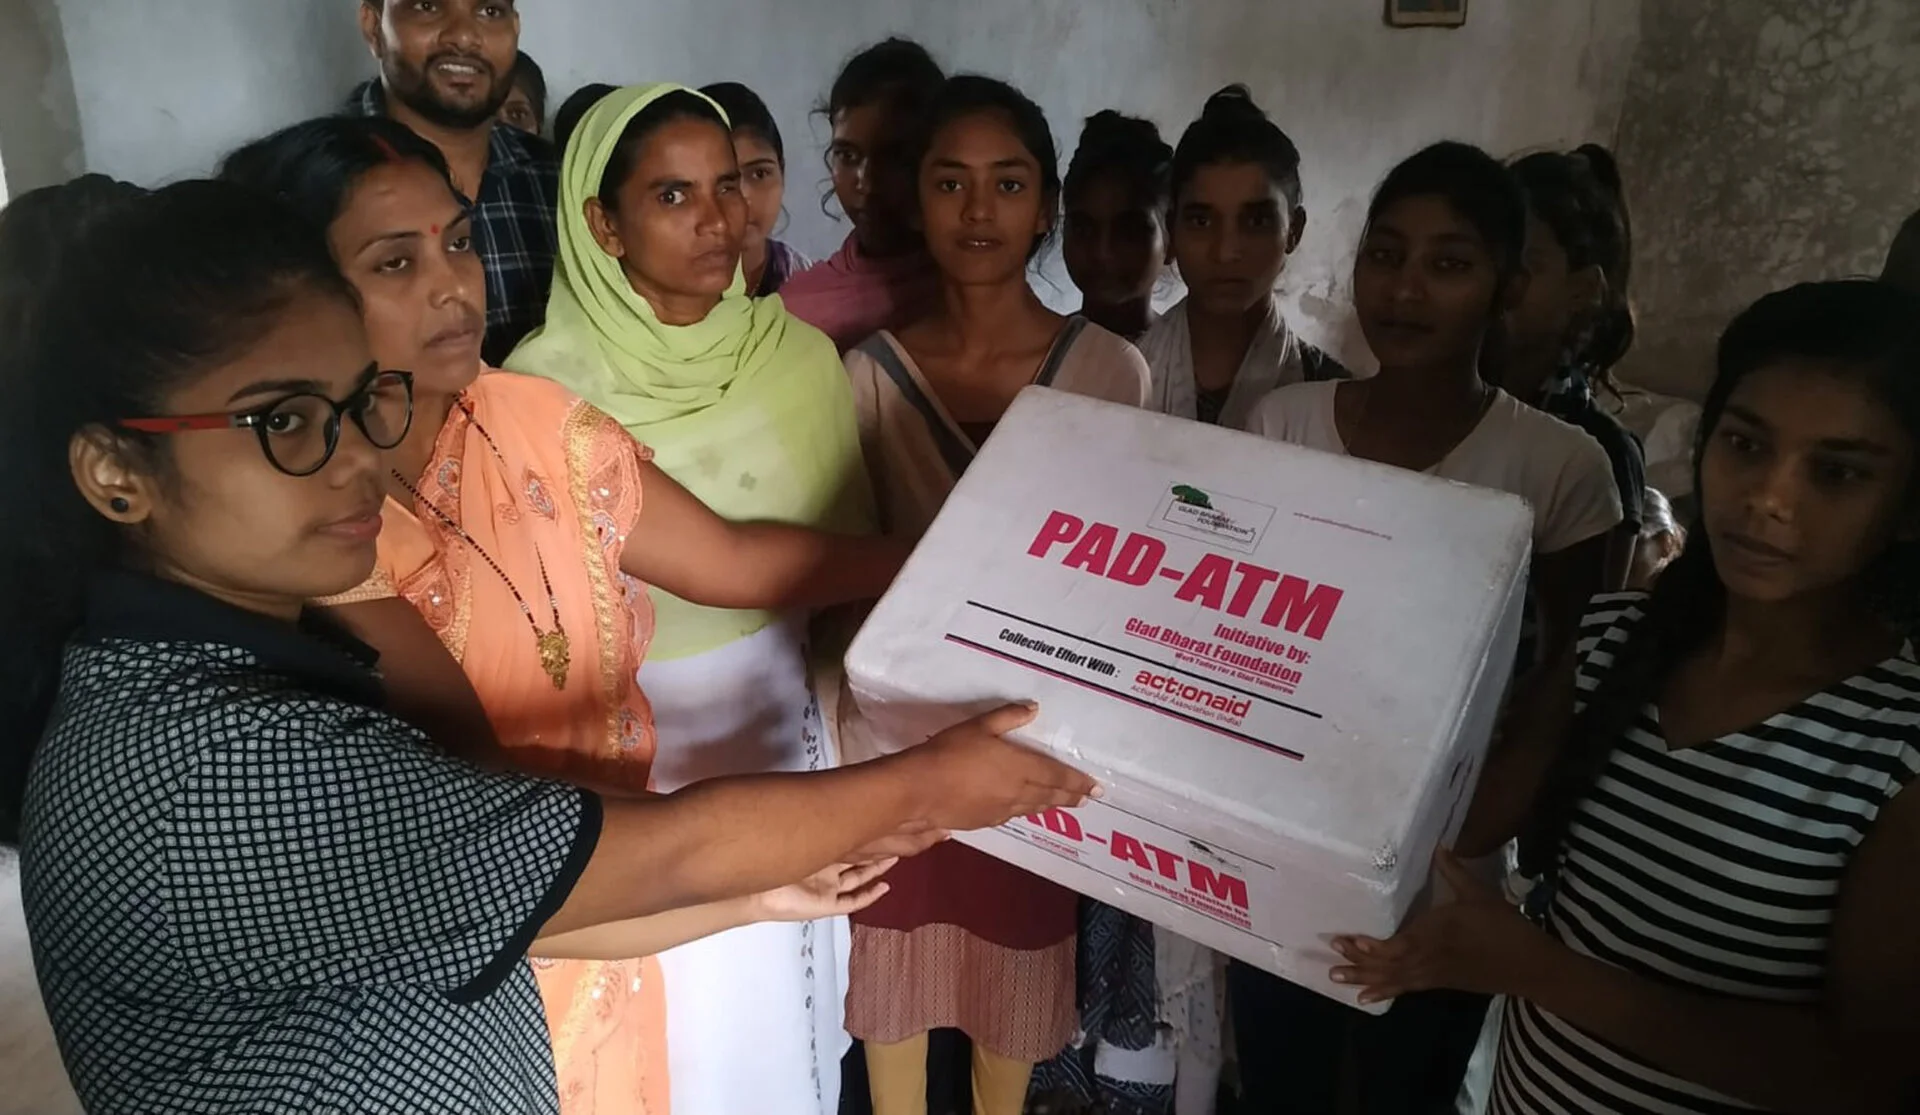 PAD-ATM: Affordable & Accessible Sanitary Pads for Women